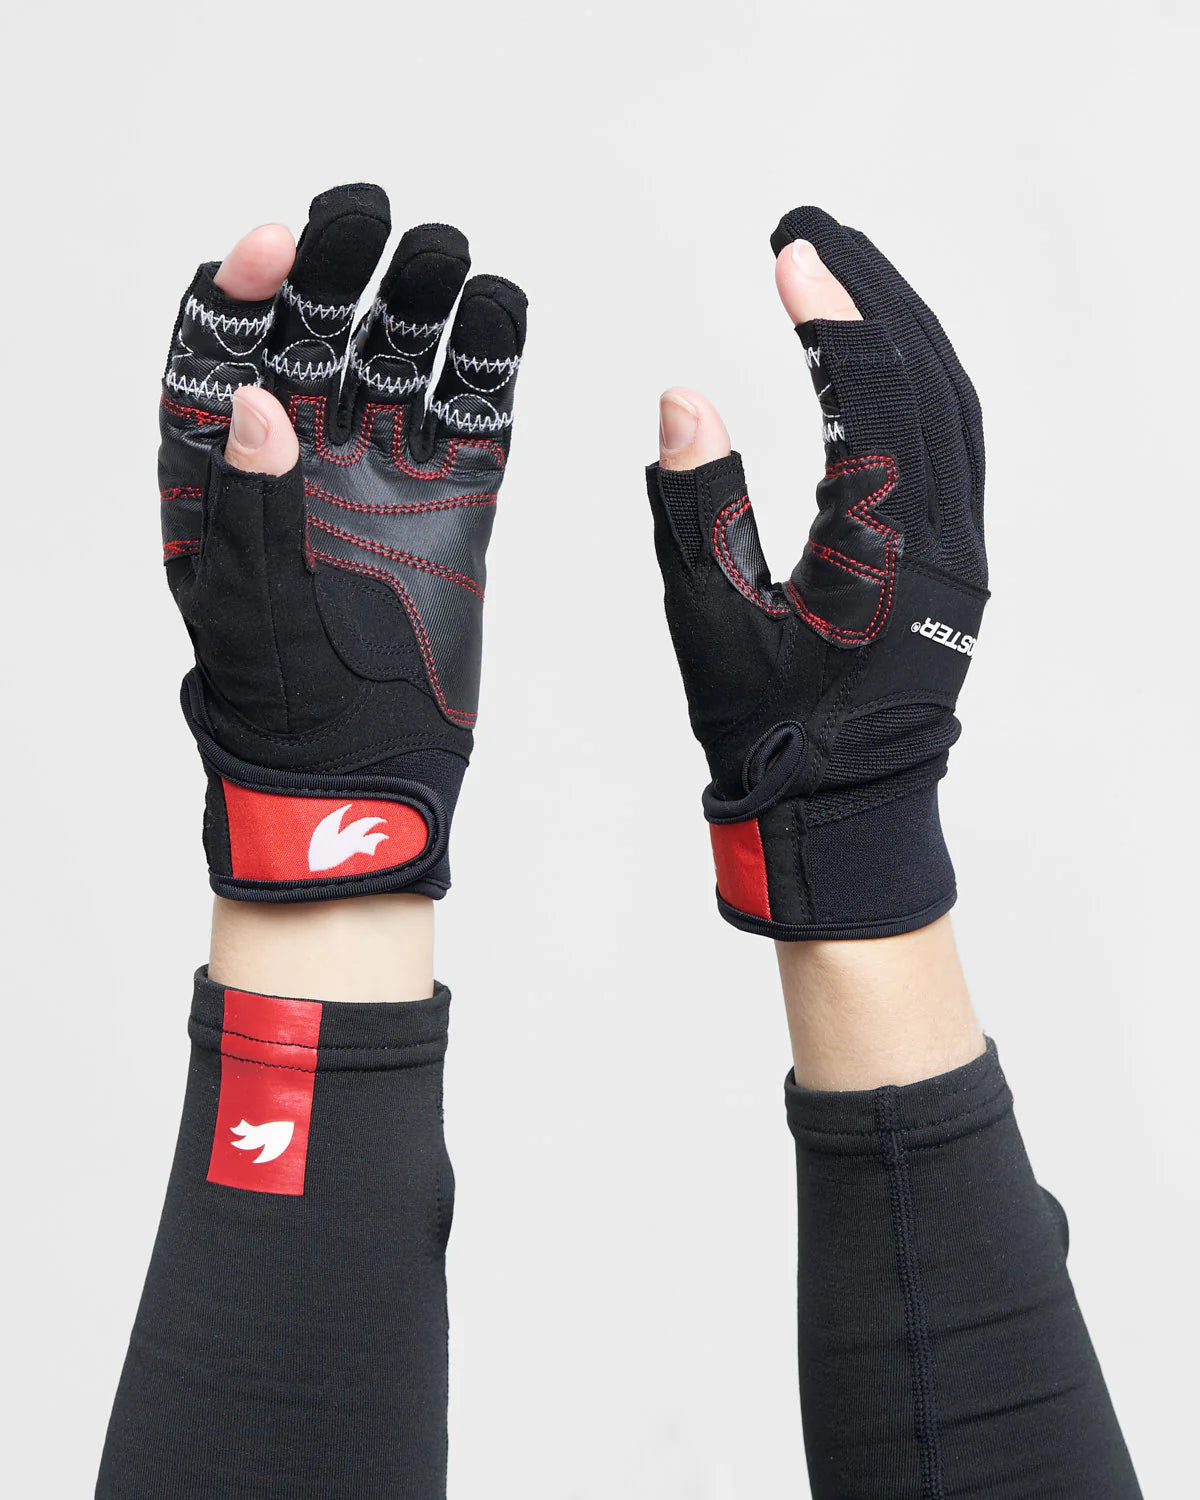 Rooster Pro Race 2 Gloves